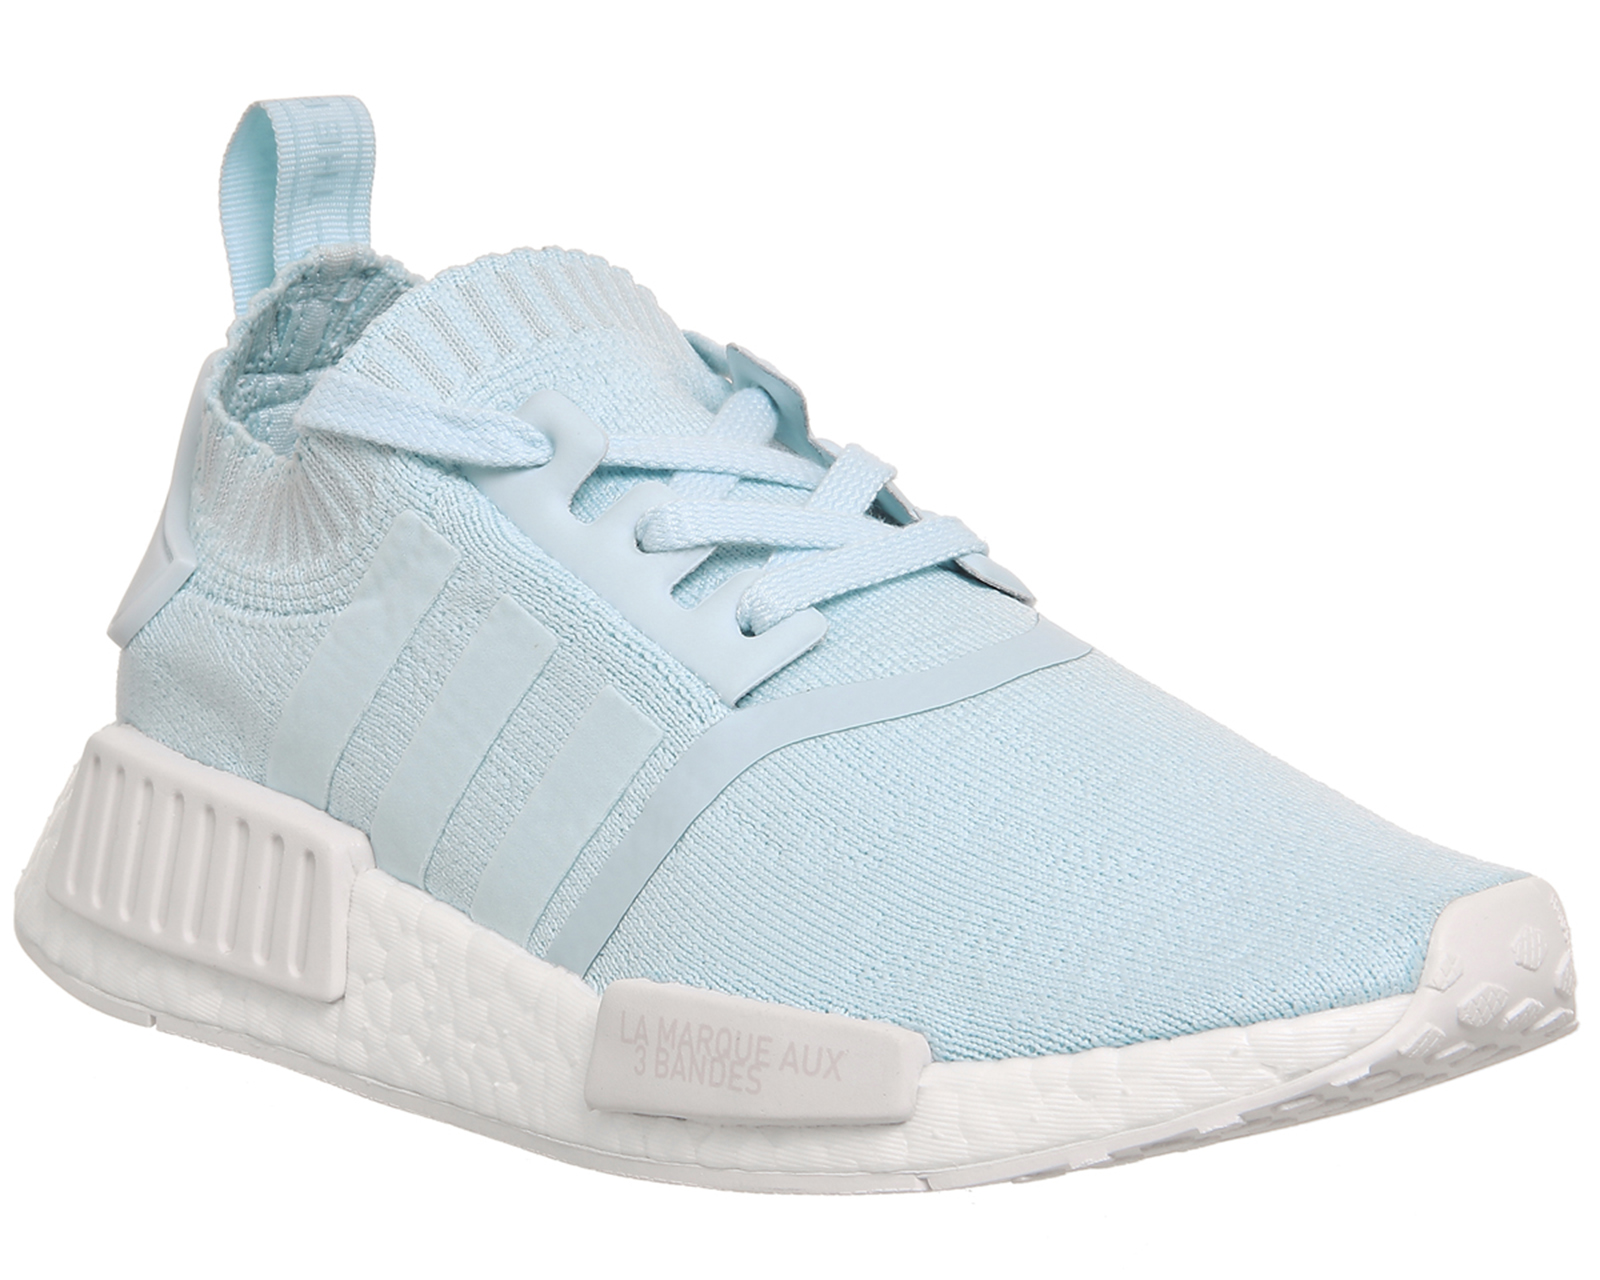 adidas Nmd R1 Prime Knit Ice Blue White 